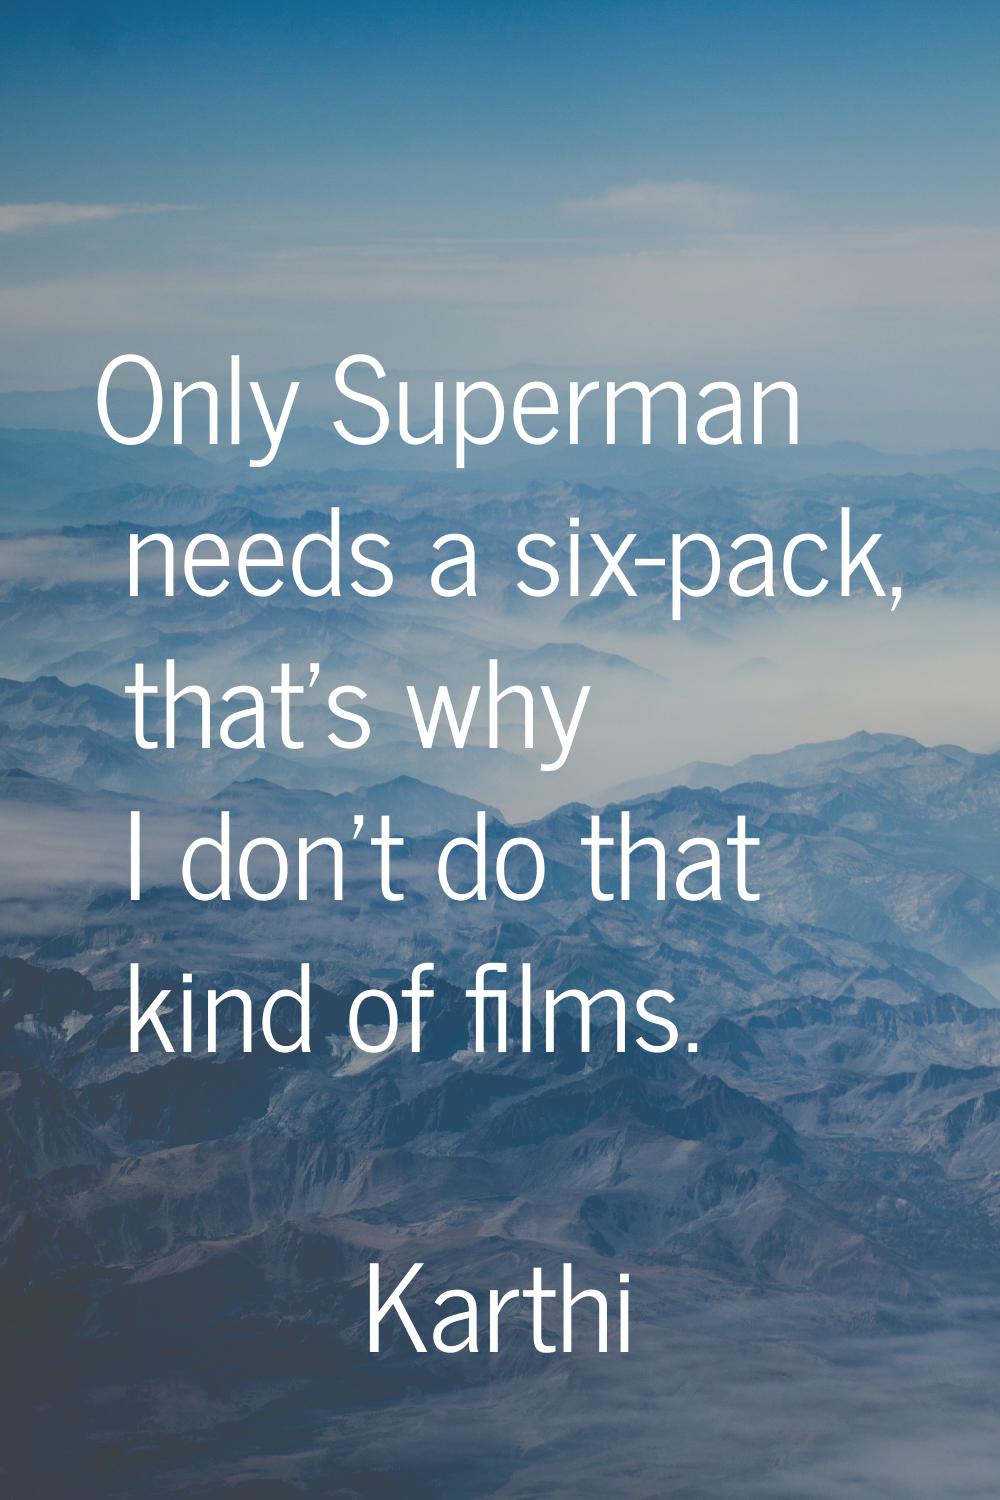 Only Superman needs a six-pack, that's why I don't do that kind of films.